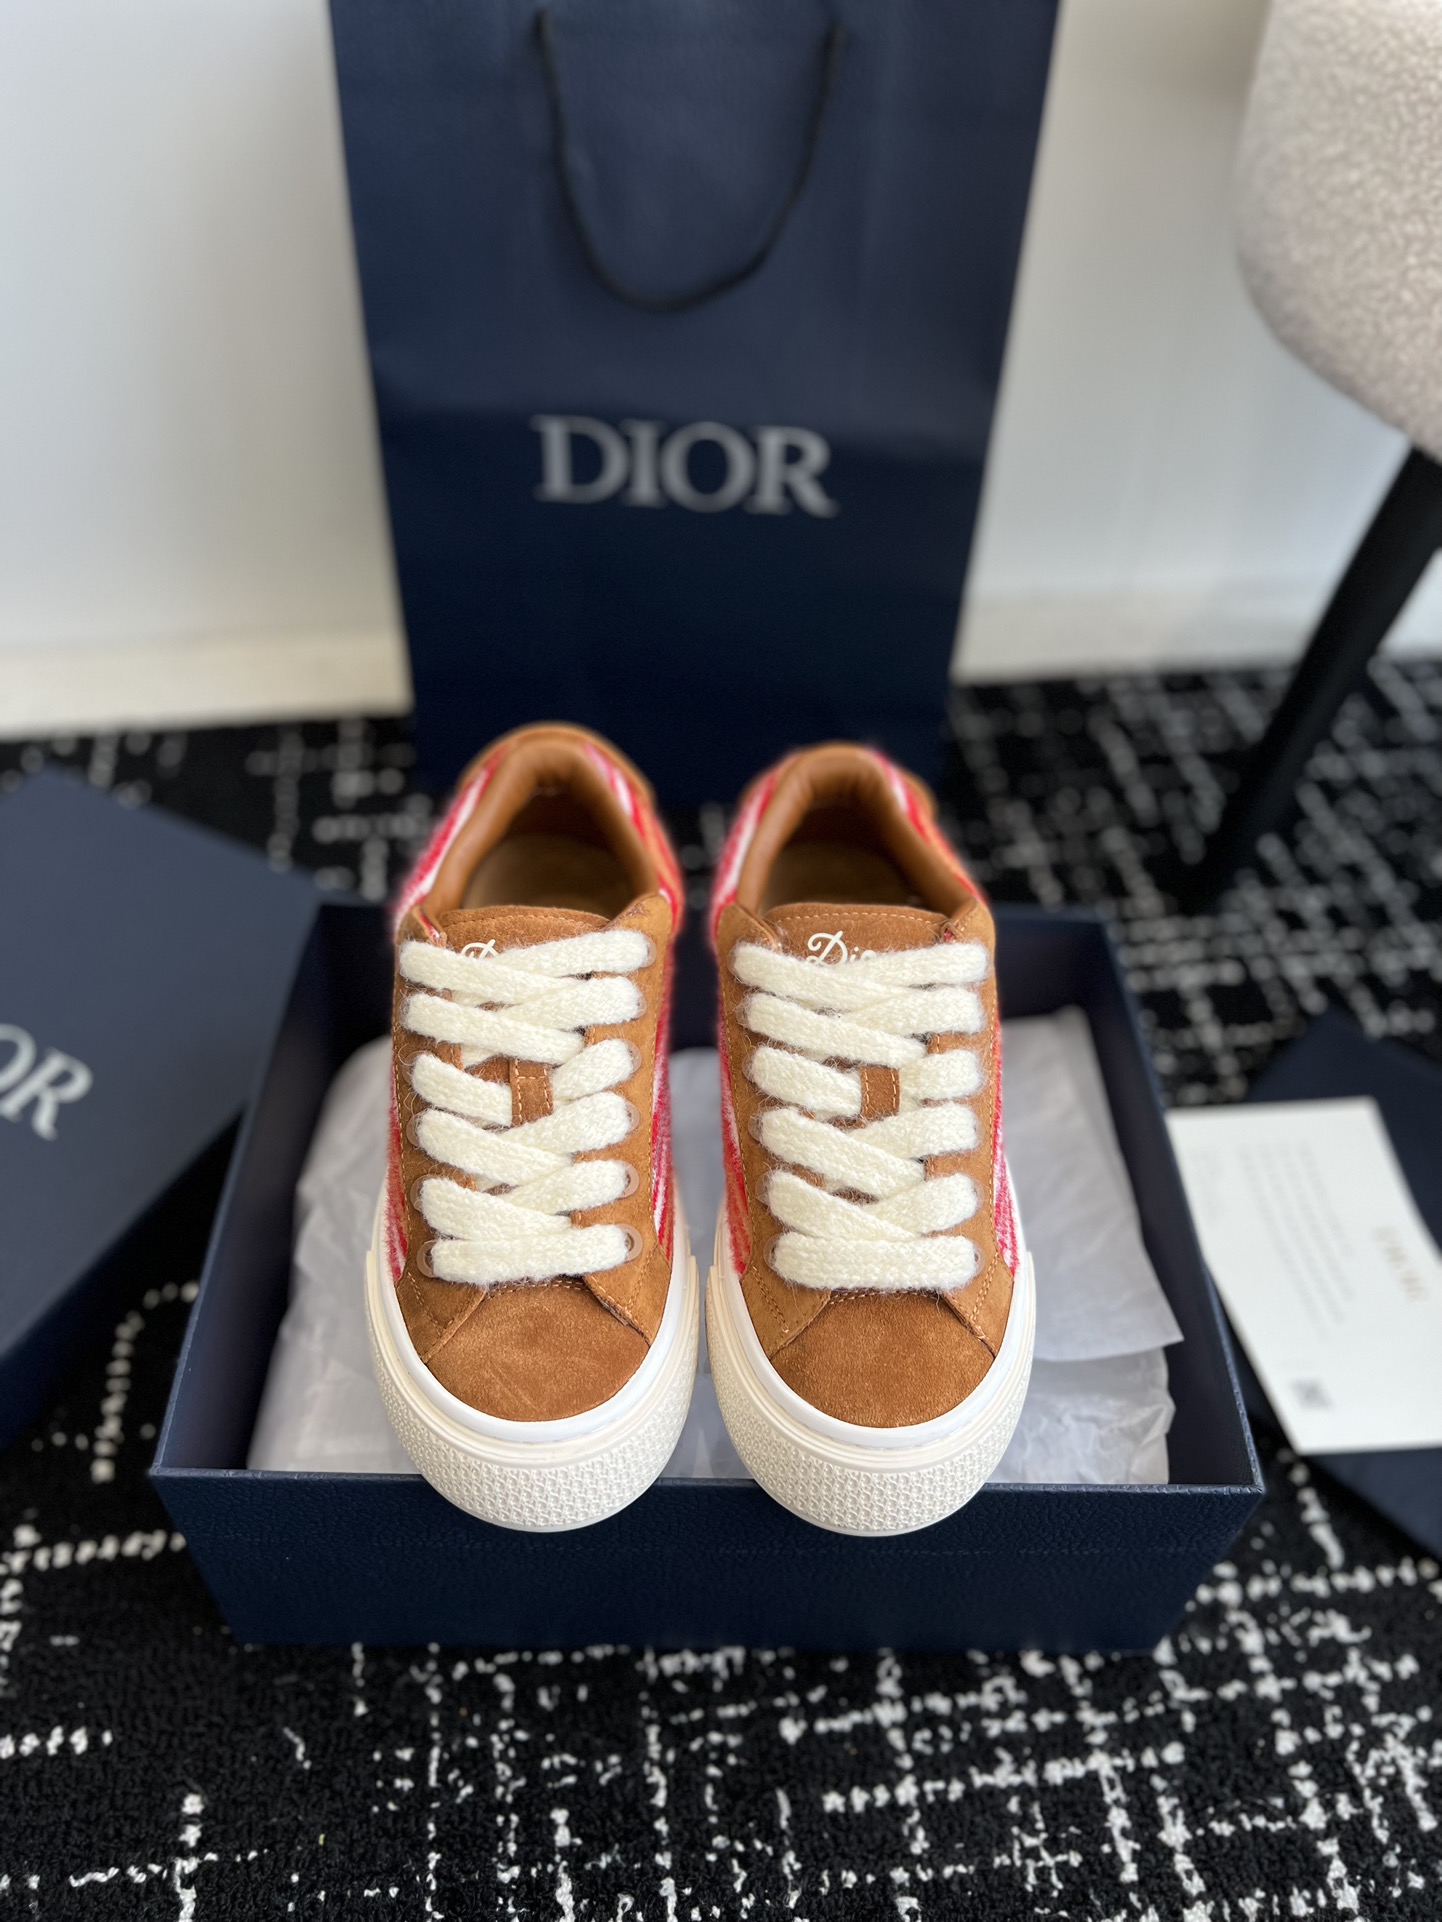 New Designer Replica
 Dior Skateboard Shoes Sneakers Casual Shoes Buy Cheap White Printing Horsehair Rubber Weave Oblique Casual